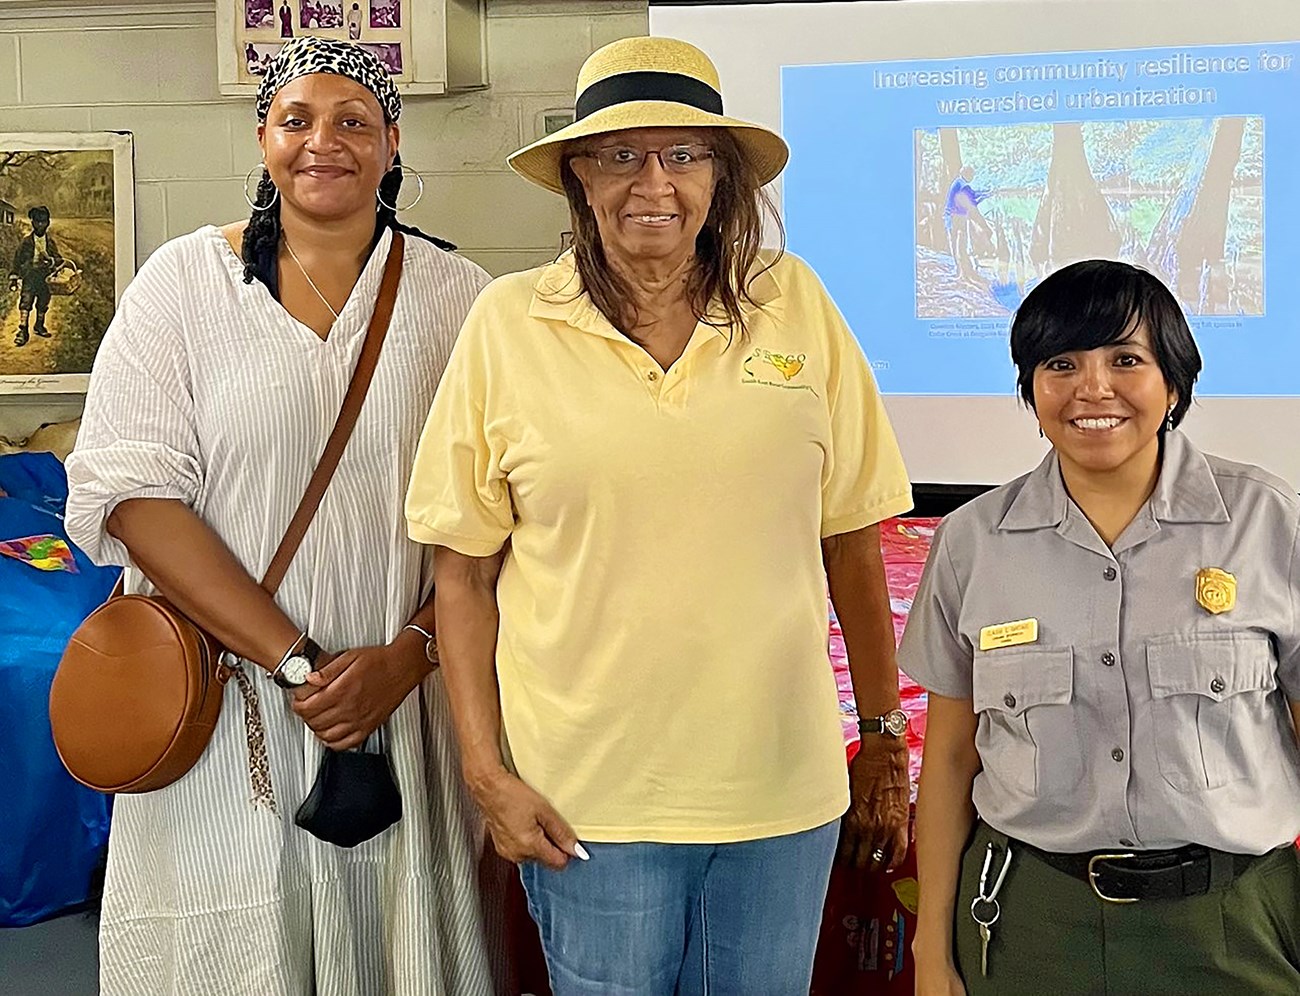 Three women, one of whom wears a National Park Service uniform, stand smiling in front of a projector screen. The slide on the screen reads "Increasing community relilience for watershed urbanization."